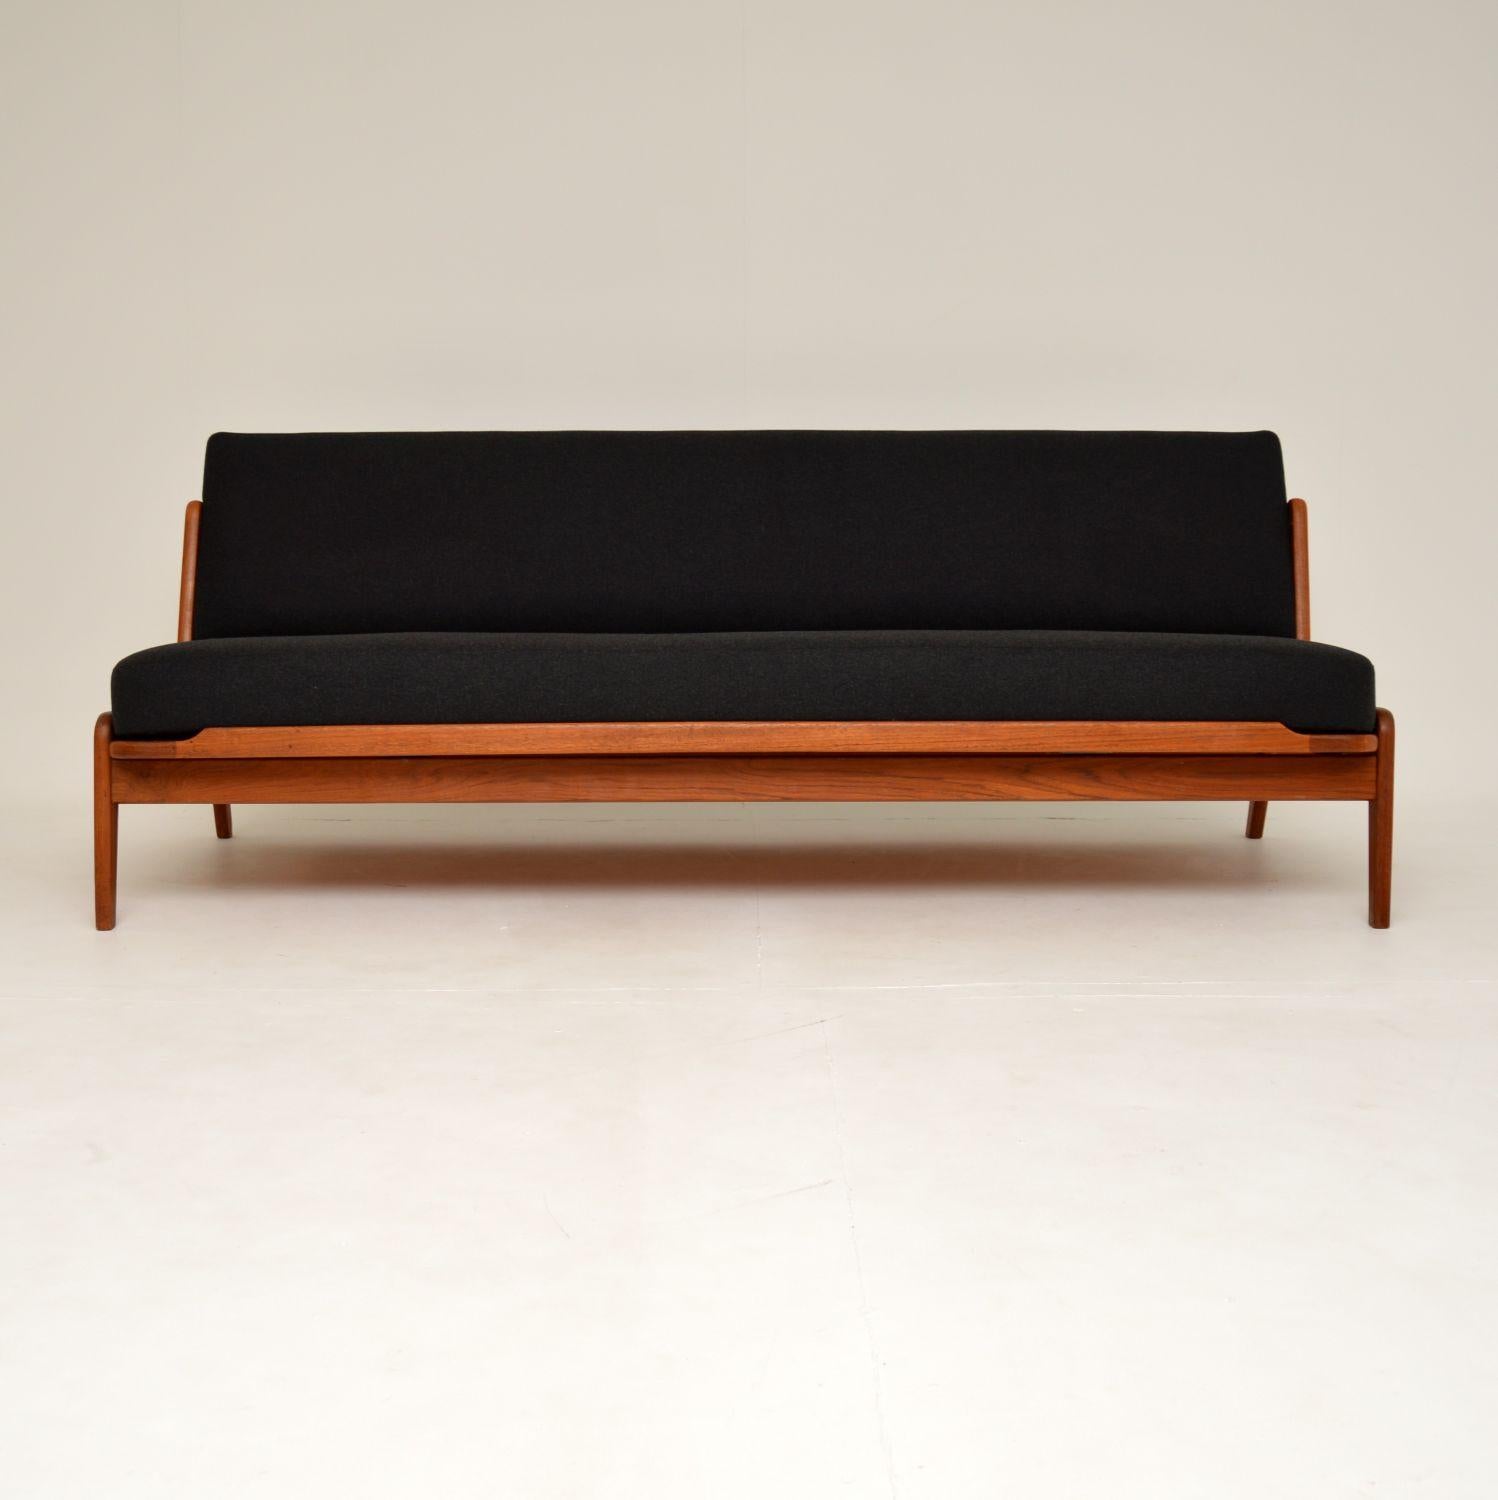 An excellent and very rare vintage Danish sofa bed in teak. This was made in Denmark by Komfort, it was designed by Arne Wahl Iversen and dates from the 1960-70’s.

The quality is fantastic, this has a very stylish and clever design. The seat